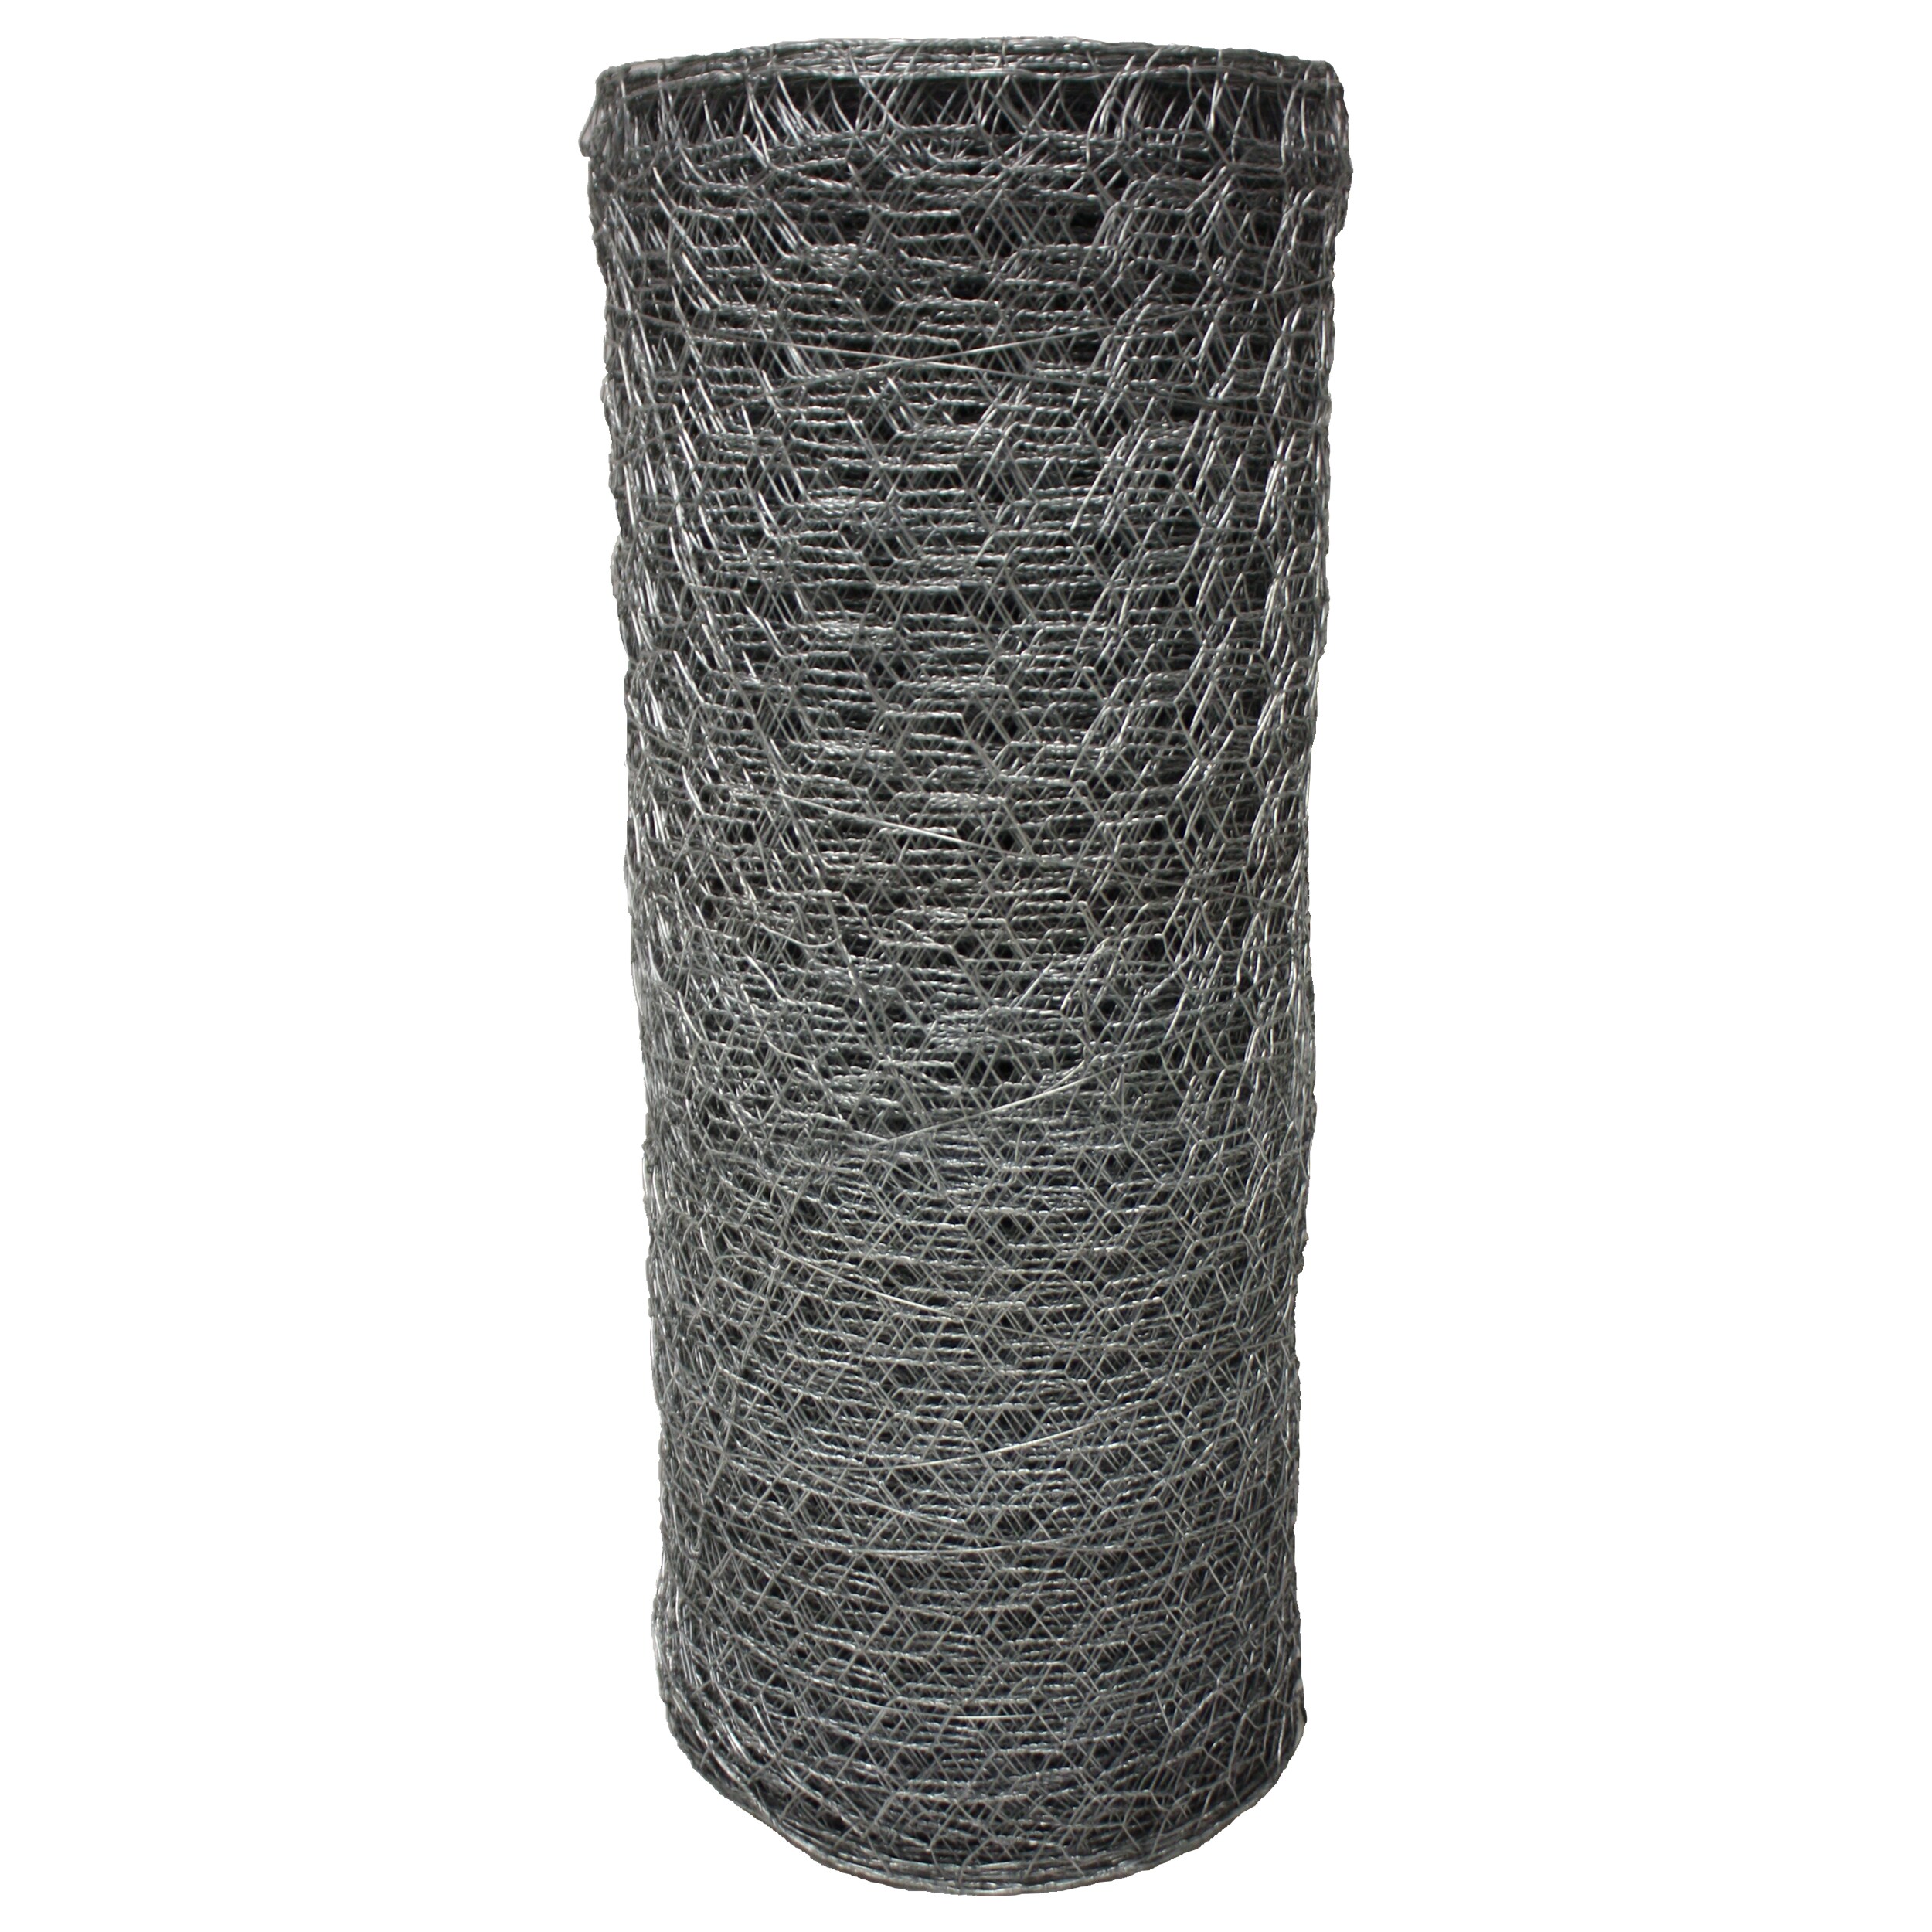 GARDEN CRAFT 25-ft x 3-ft Gray Galvanized Steel Chicken Wire Rolled Fencing  with Mesh Size 1-in in the Rolled Fencing department at